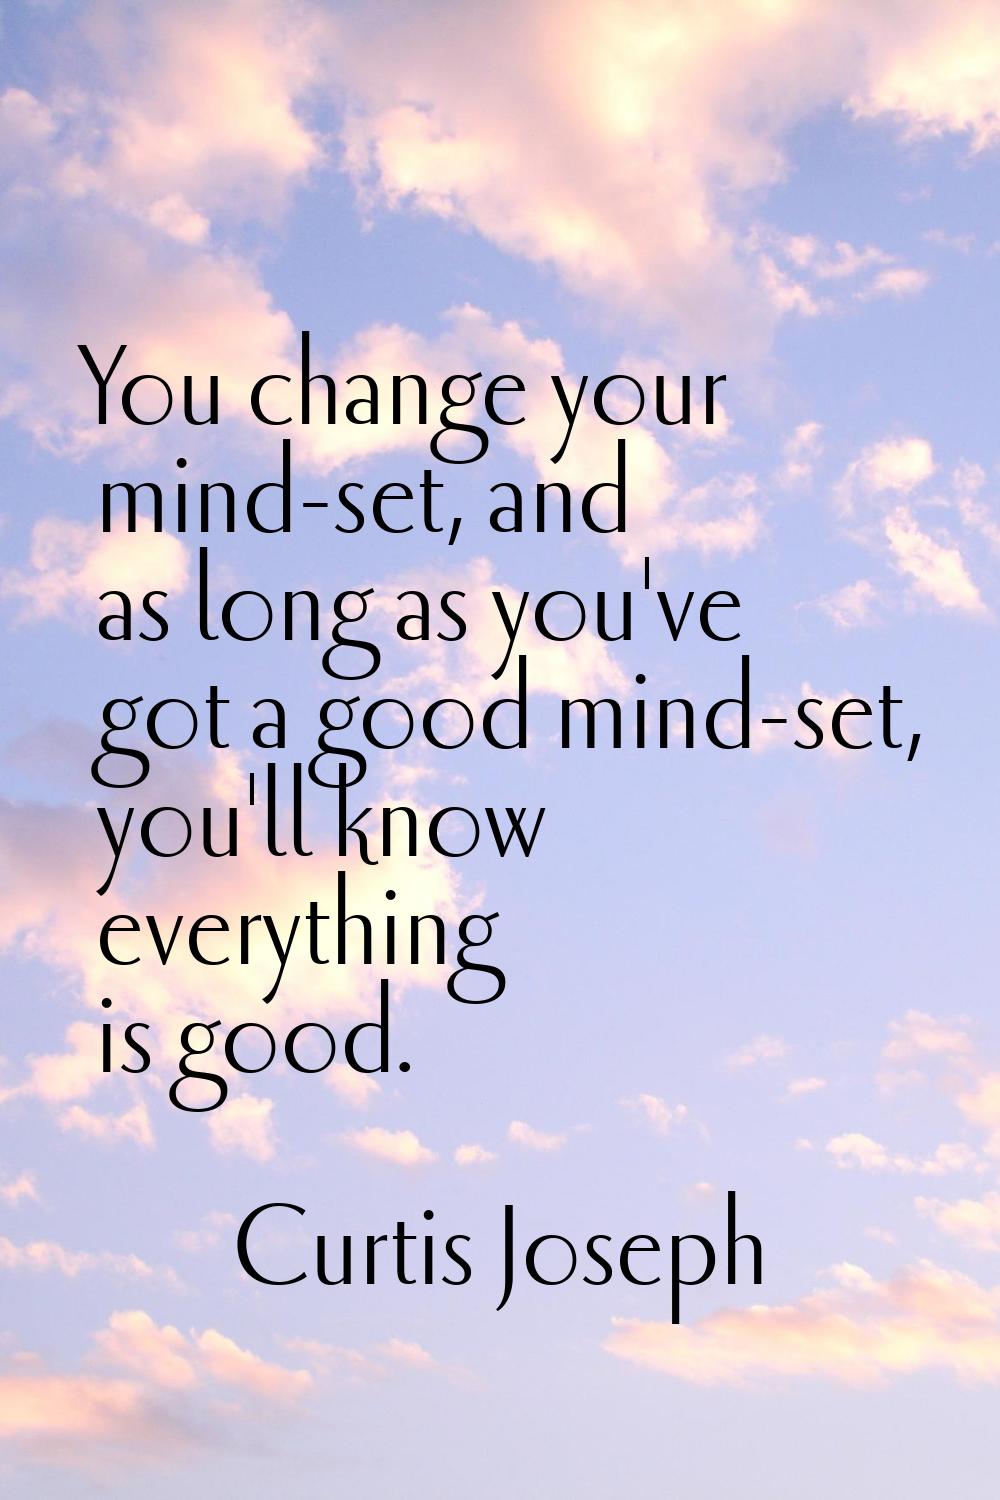 You change your mind-set, and as long as you've got a good mind-set, you'll know everything is good